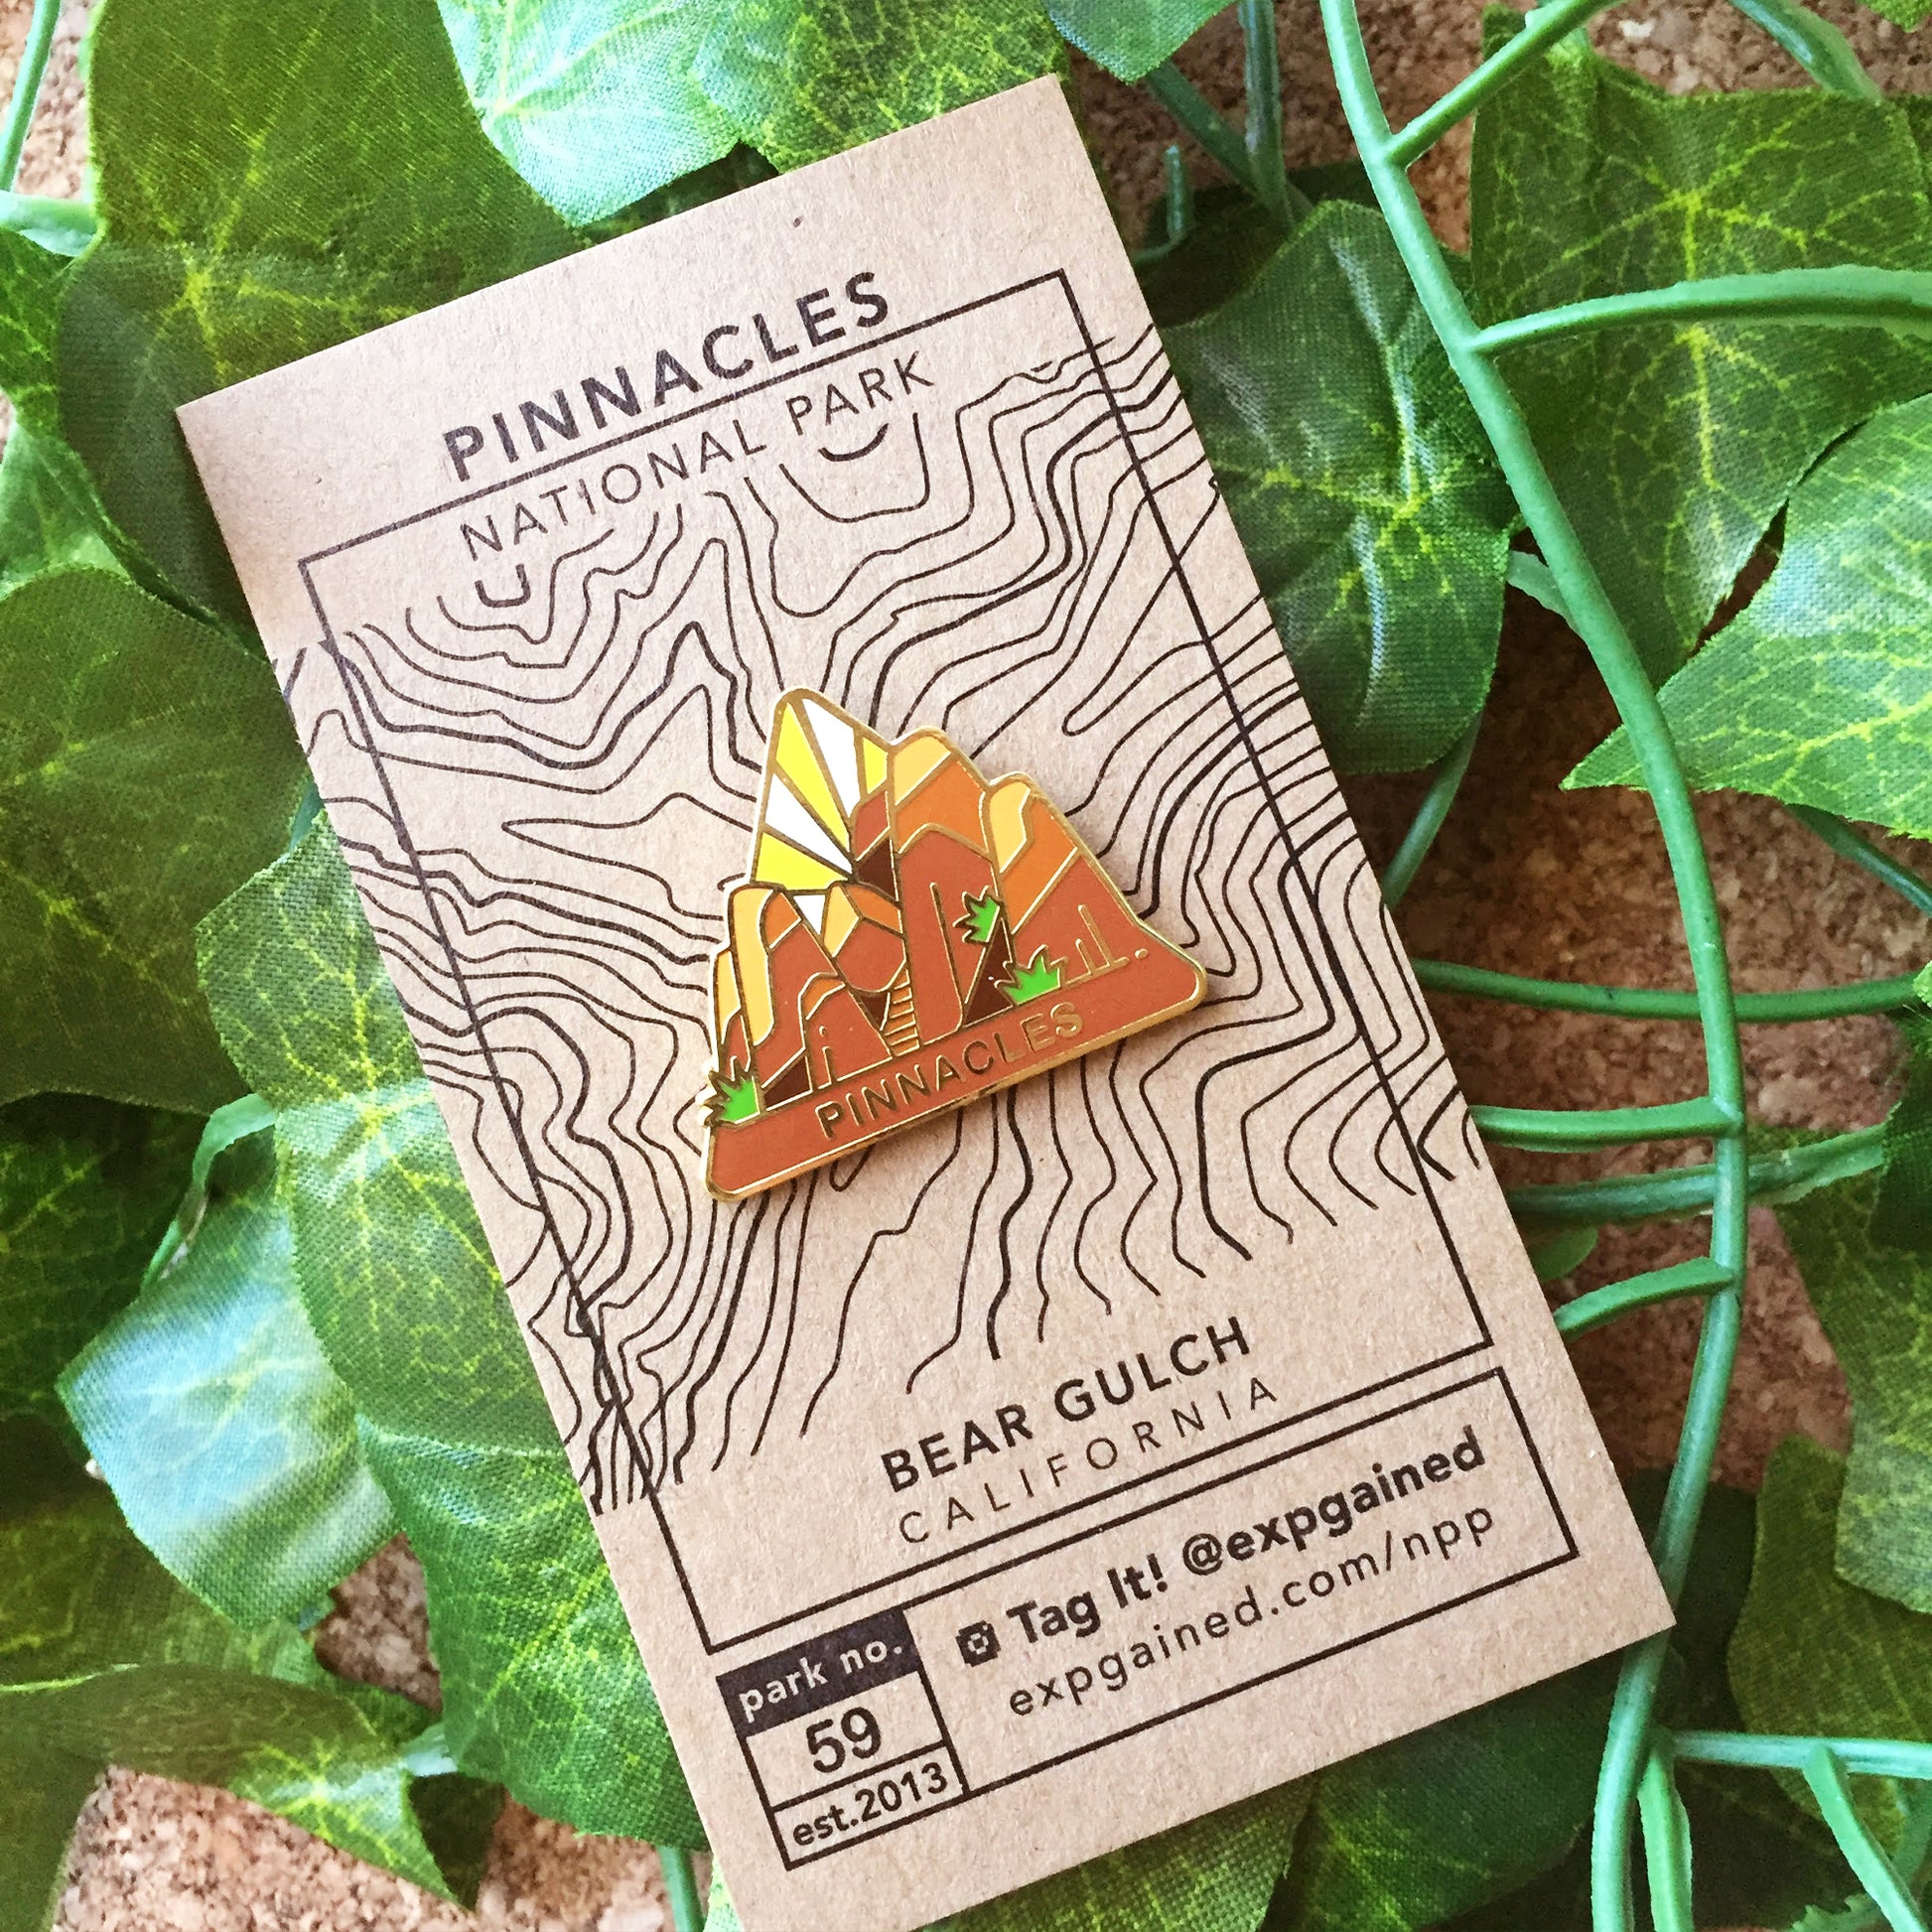 Triangle Pinnacles national park enamel pin featuring a view from the beehive hike on a brown business card size backing card with a topo map of the Bear Gulch trail.